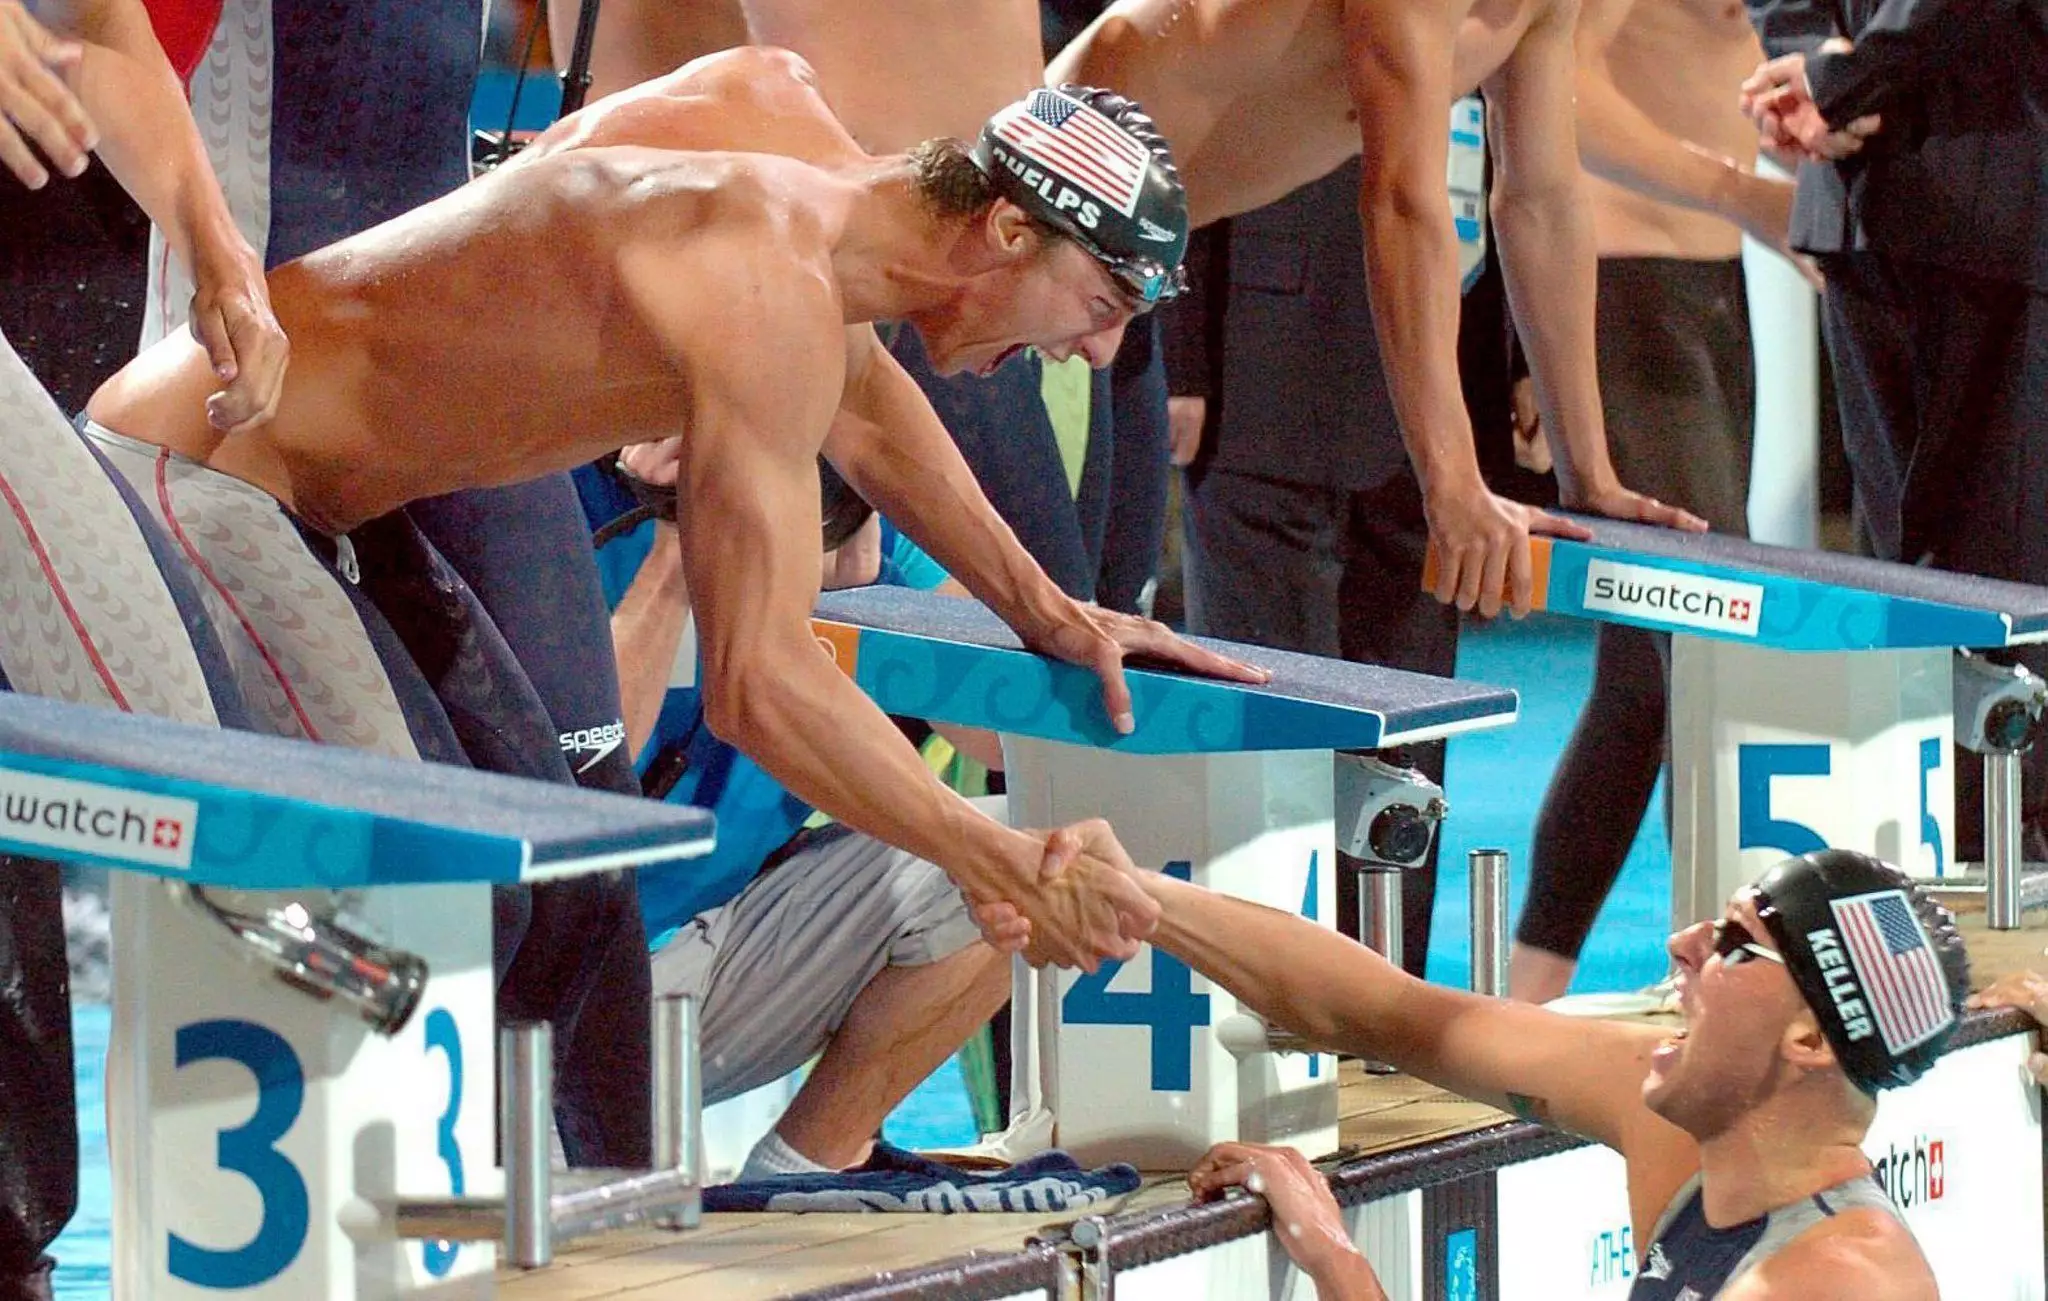 Keller being congratulated by team mate Michael Phelps in the 2004 Olympics.